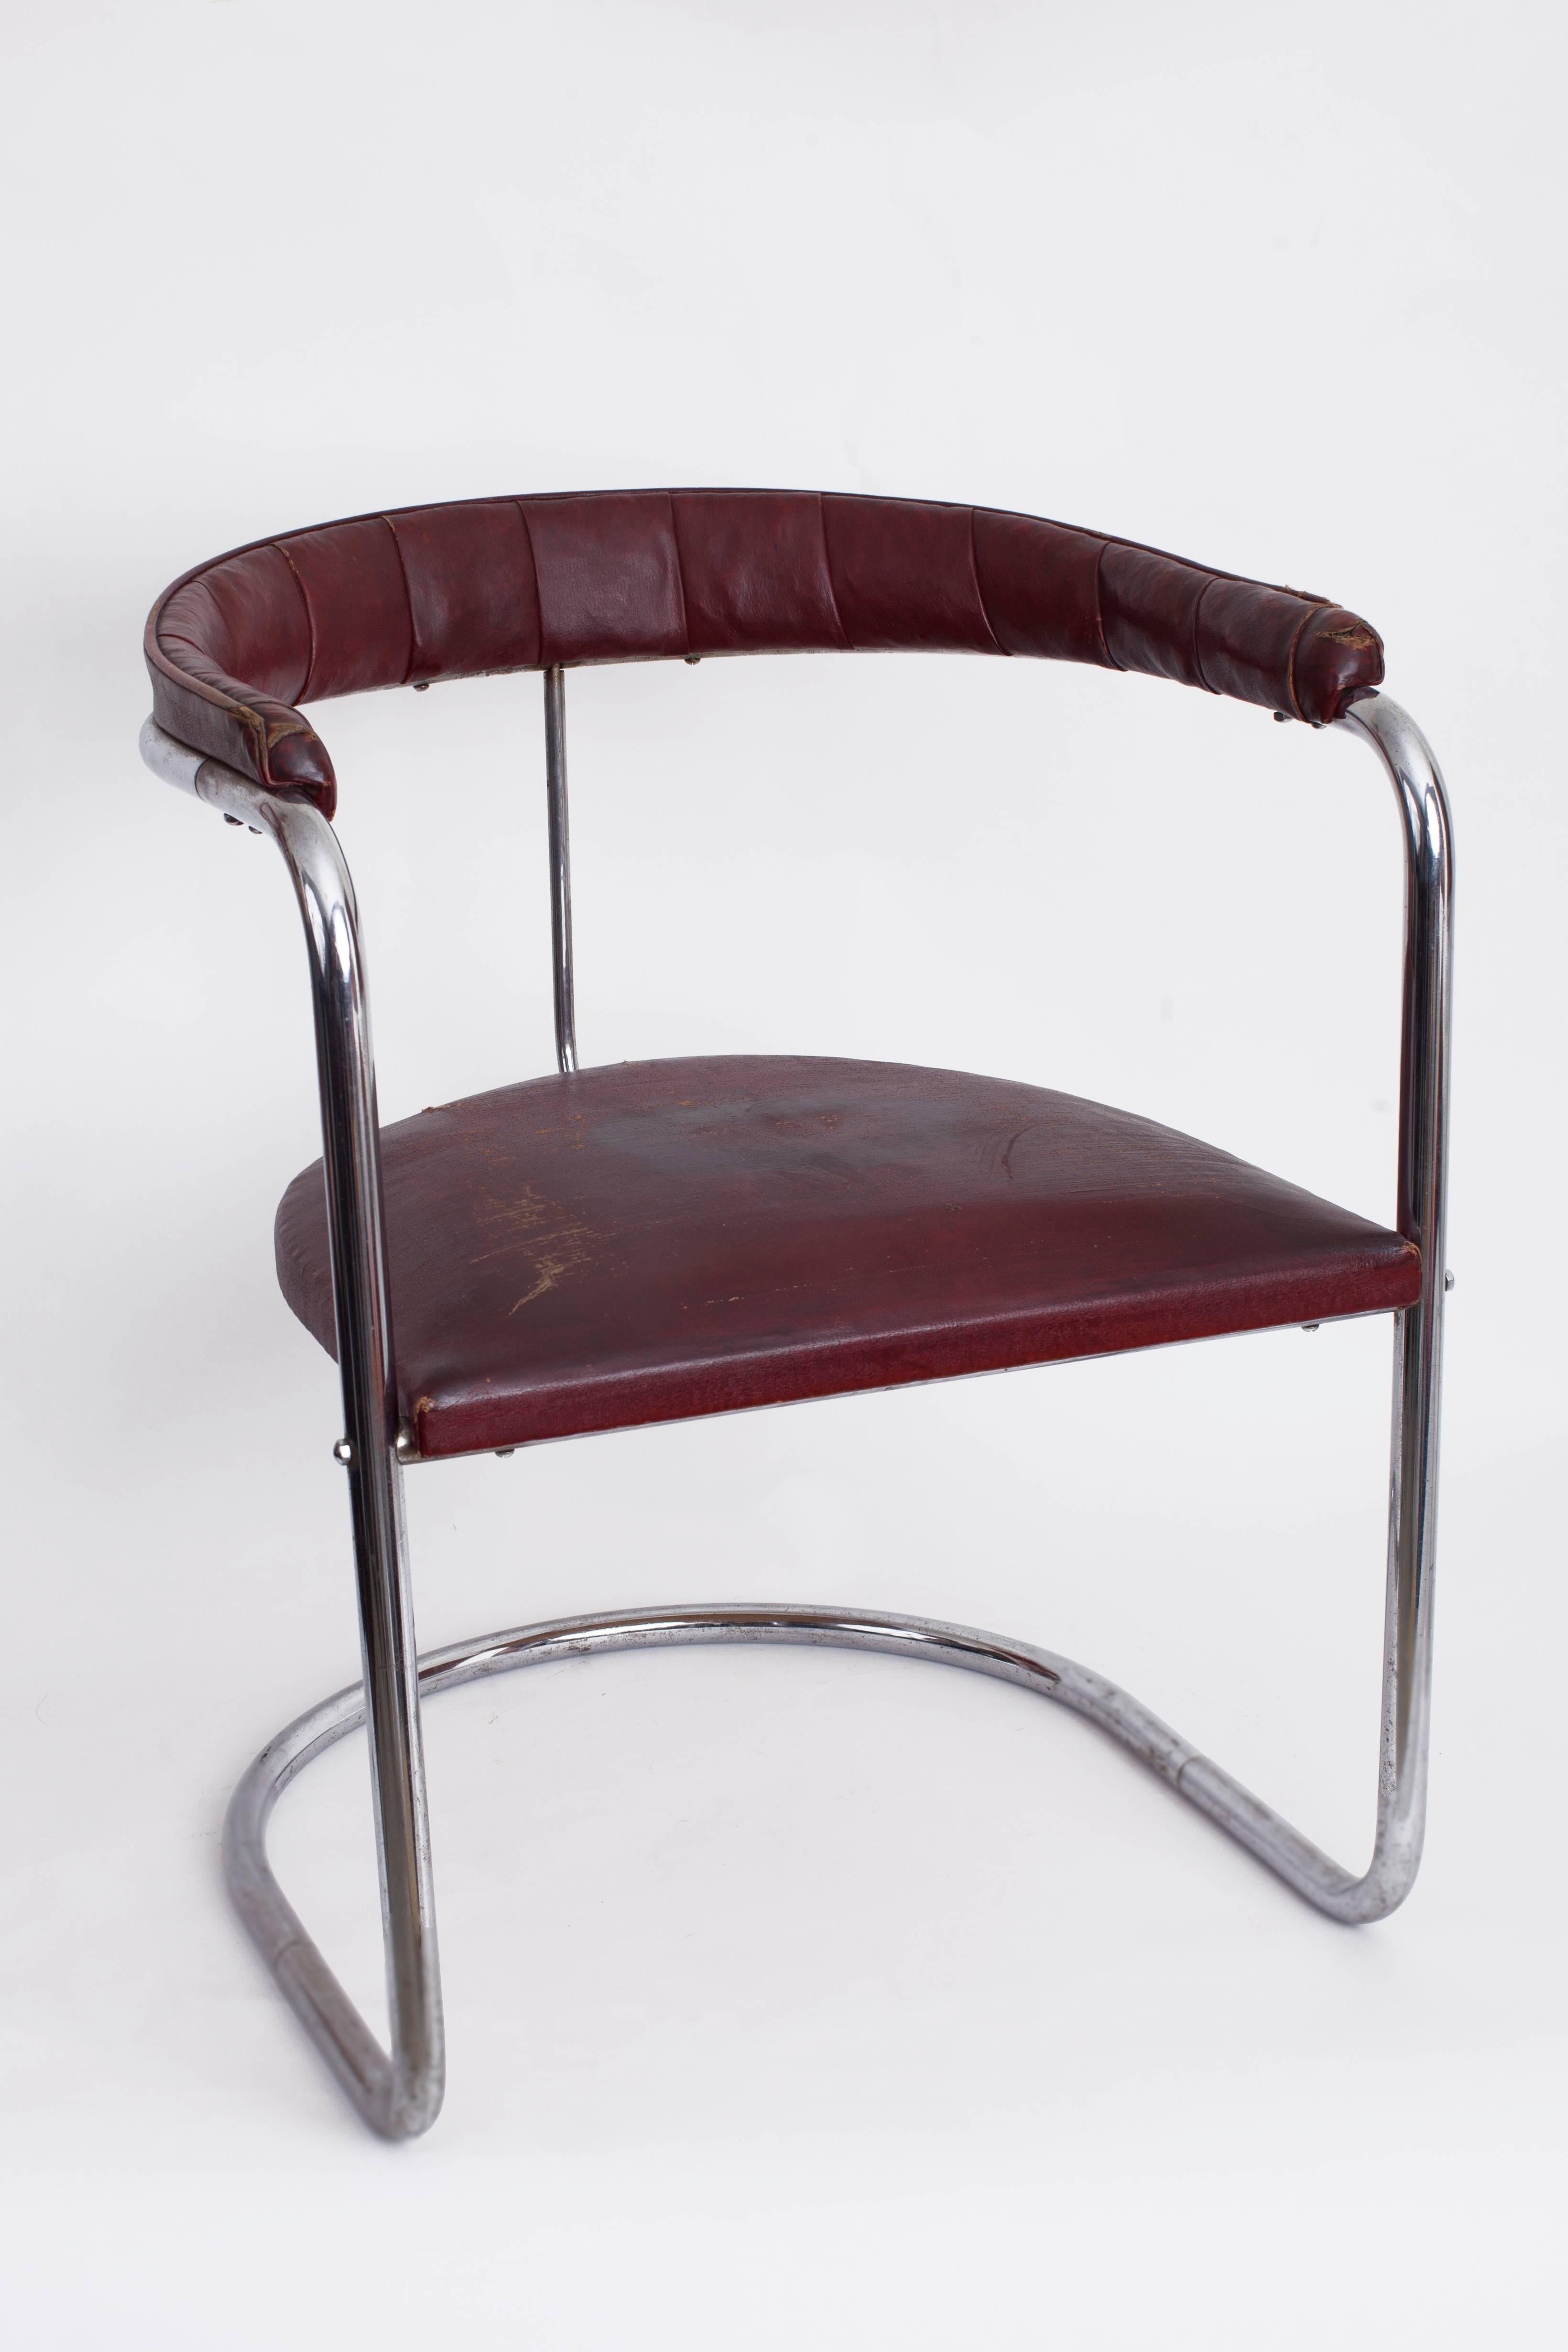 Art Deco Original Anton Lorenz for Thonet Cantilevered Steel Tube SS33 Chair, 1930s For Sale